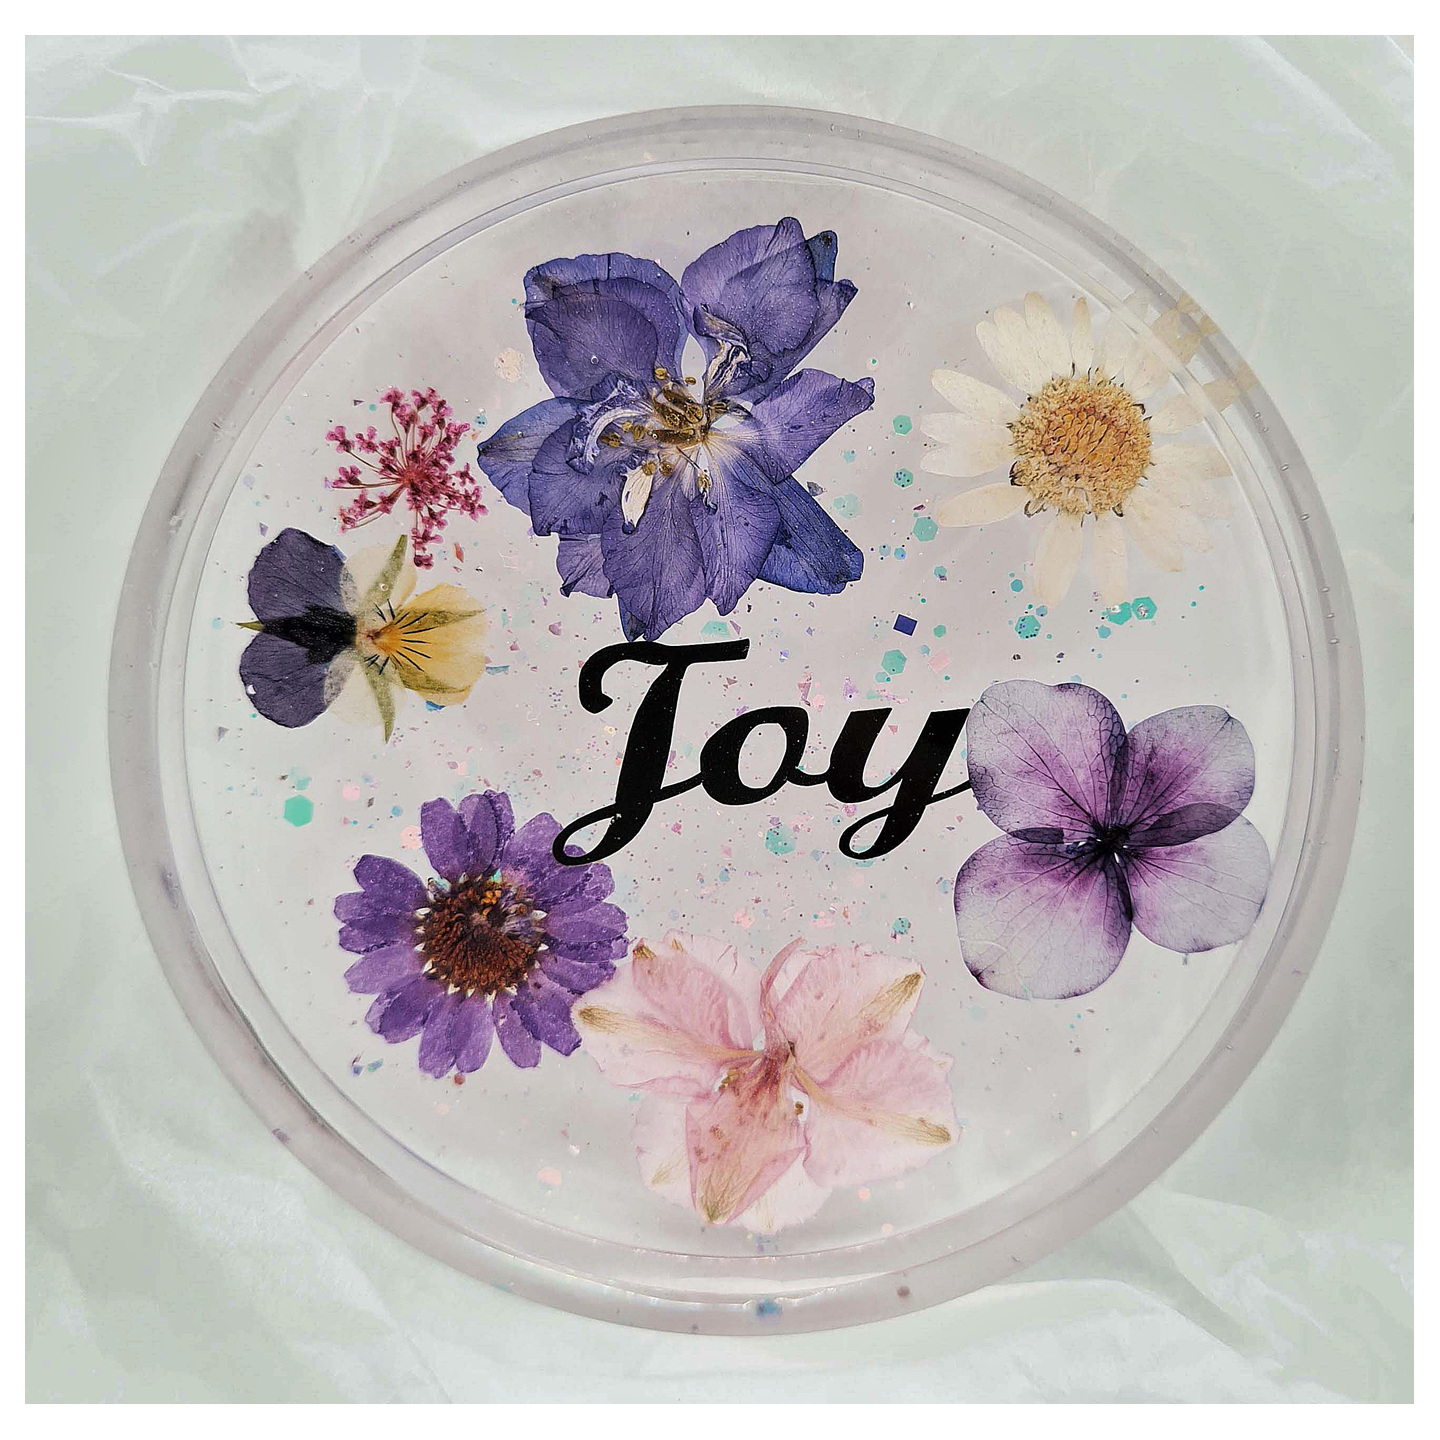 Joy   Real Pressed Flowers & Leaves Resin Coaster with an inspirational word Handmade